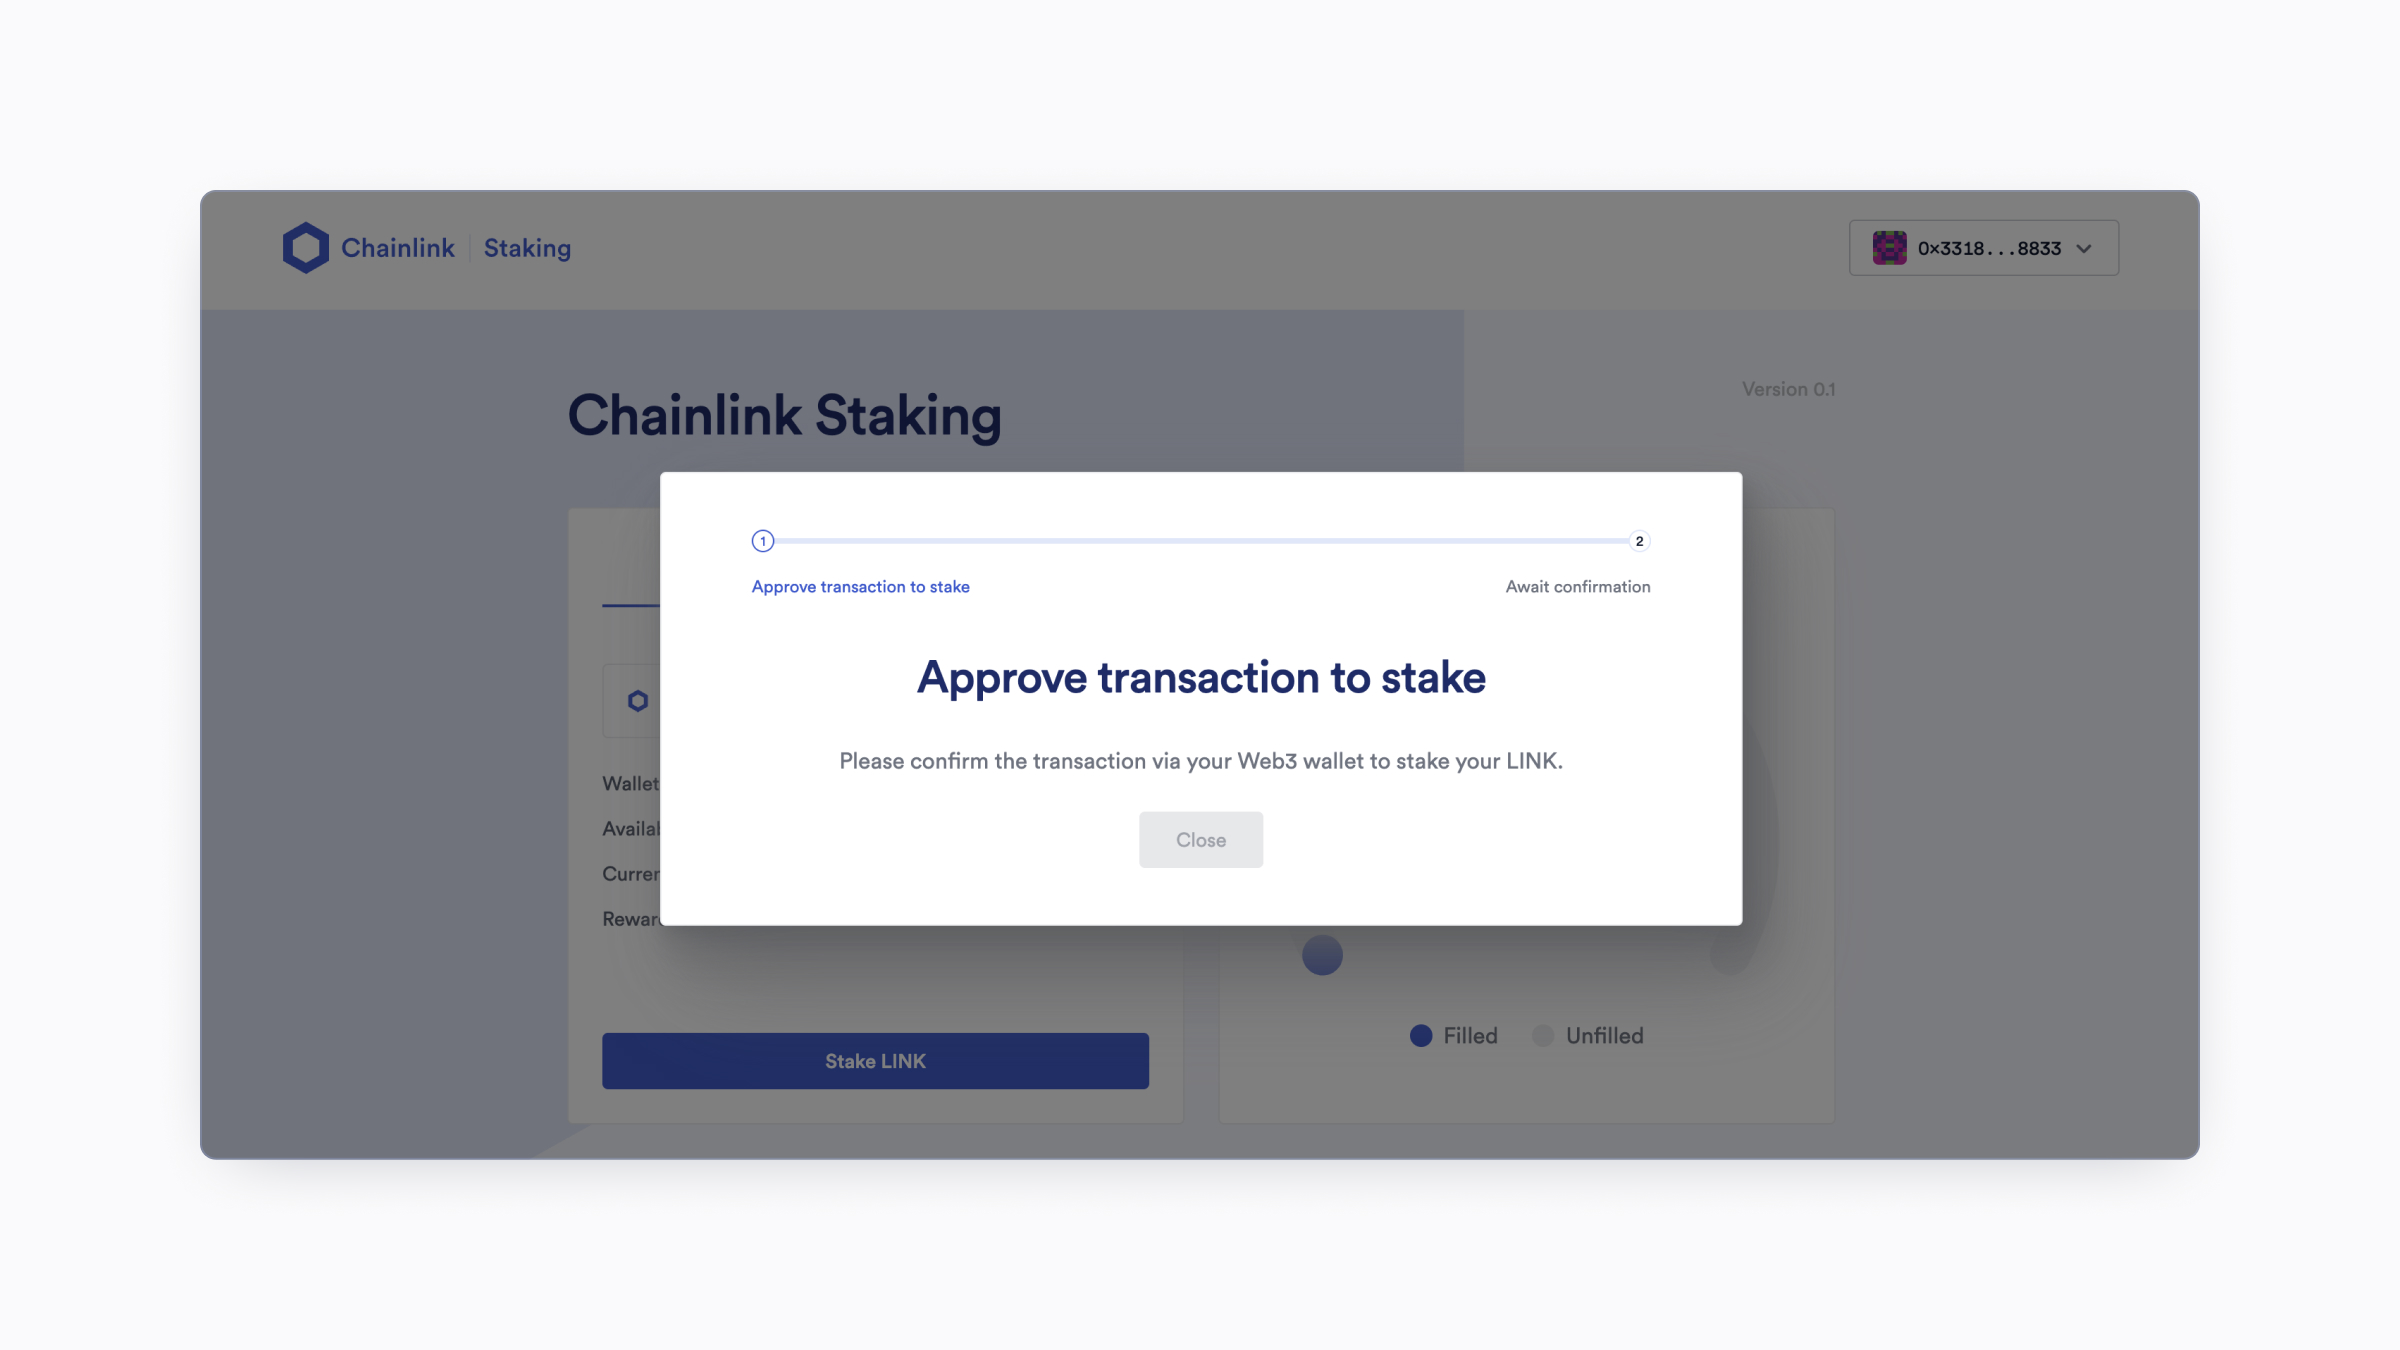 Screenshot showing the approve transaction popup on the Chainlink Staking app.